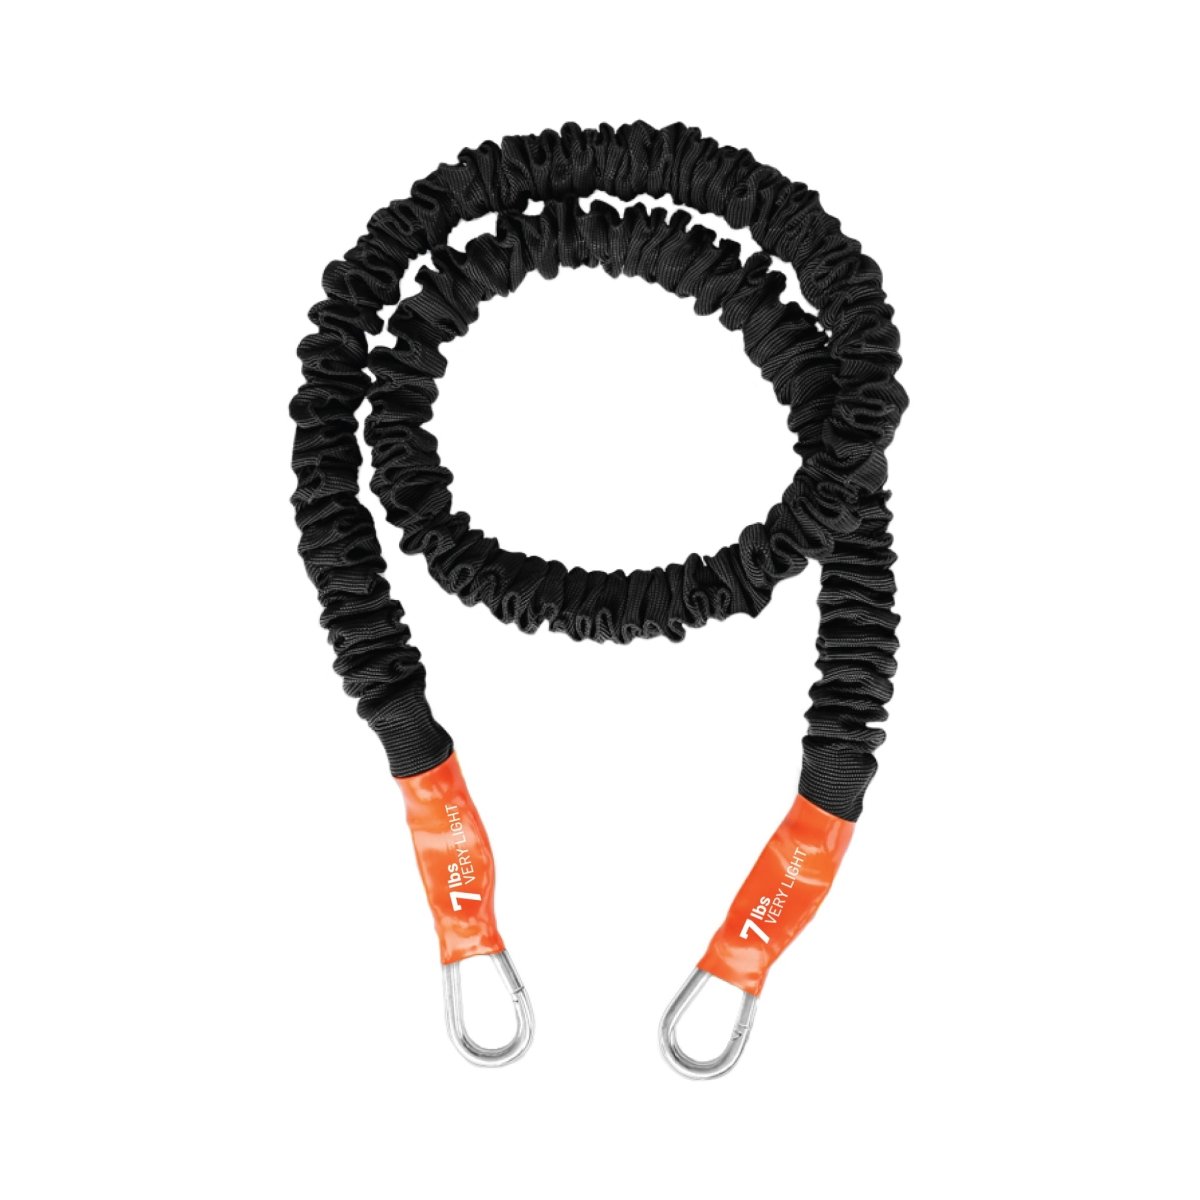 Stackable tension bands with clip on each end. this bungee style resistance cord is designed for all workouts, exercise routine and fitness journey. covered, sheathed for your safety, to be anti-snap and long lasting. Best band on the market for a High resistance tension tube workout